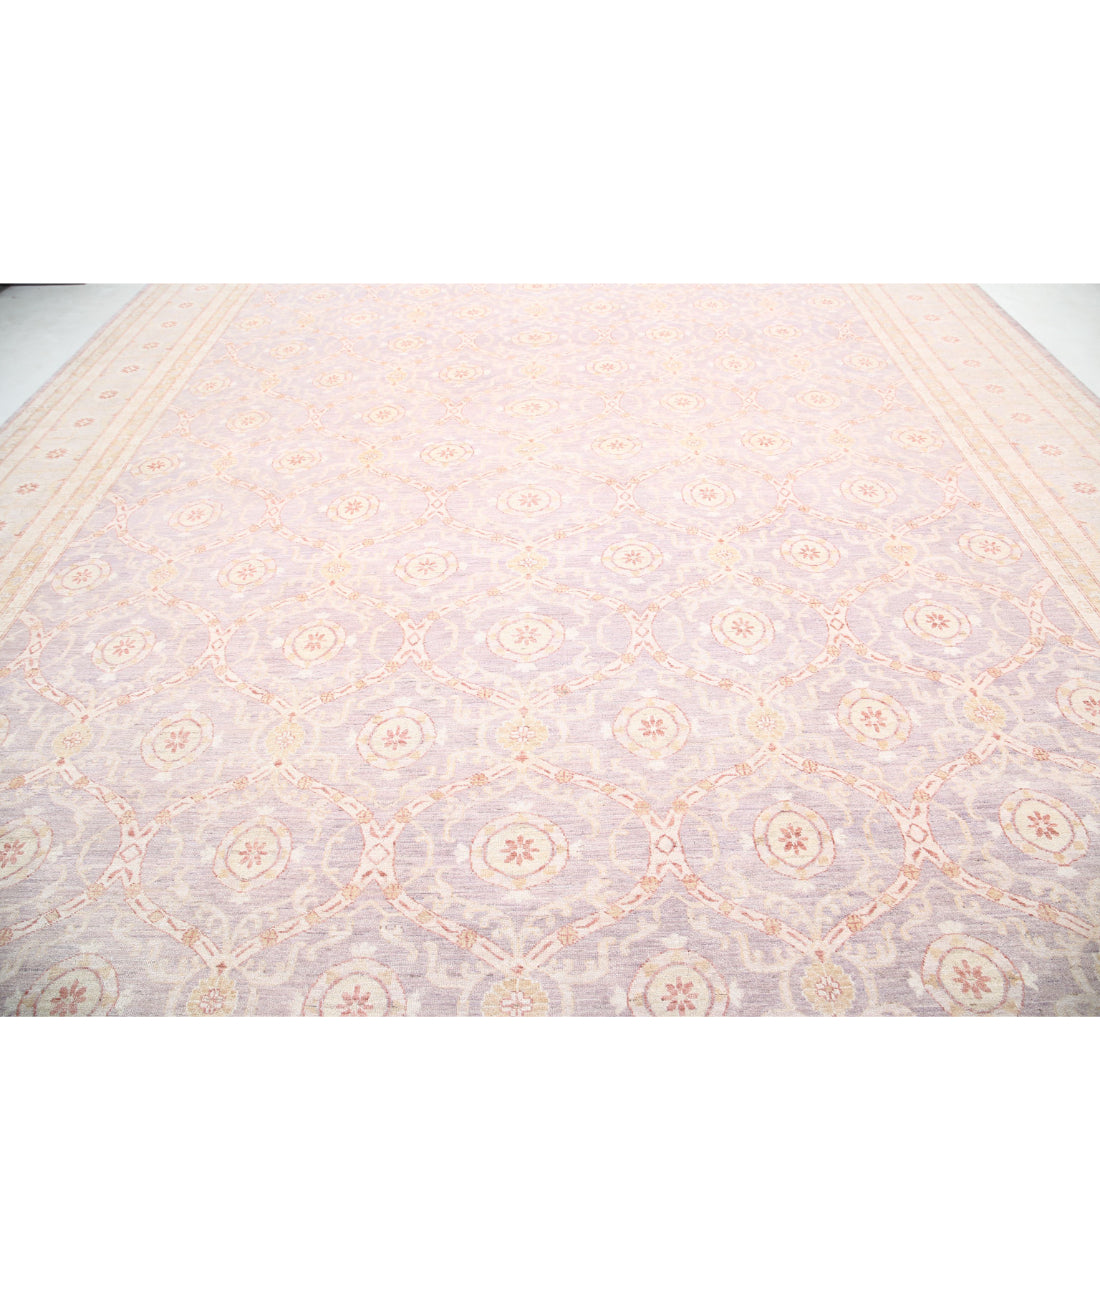 Hand Knotted Serenity Wool Rug - 13'11'' x 18'9'' 13'11'' x 18'9'' (418 X 563) / Lilac / Ivory